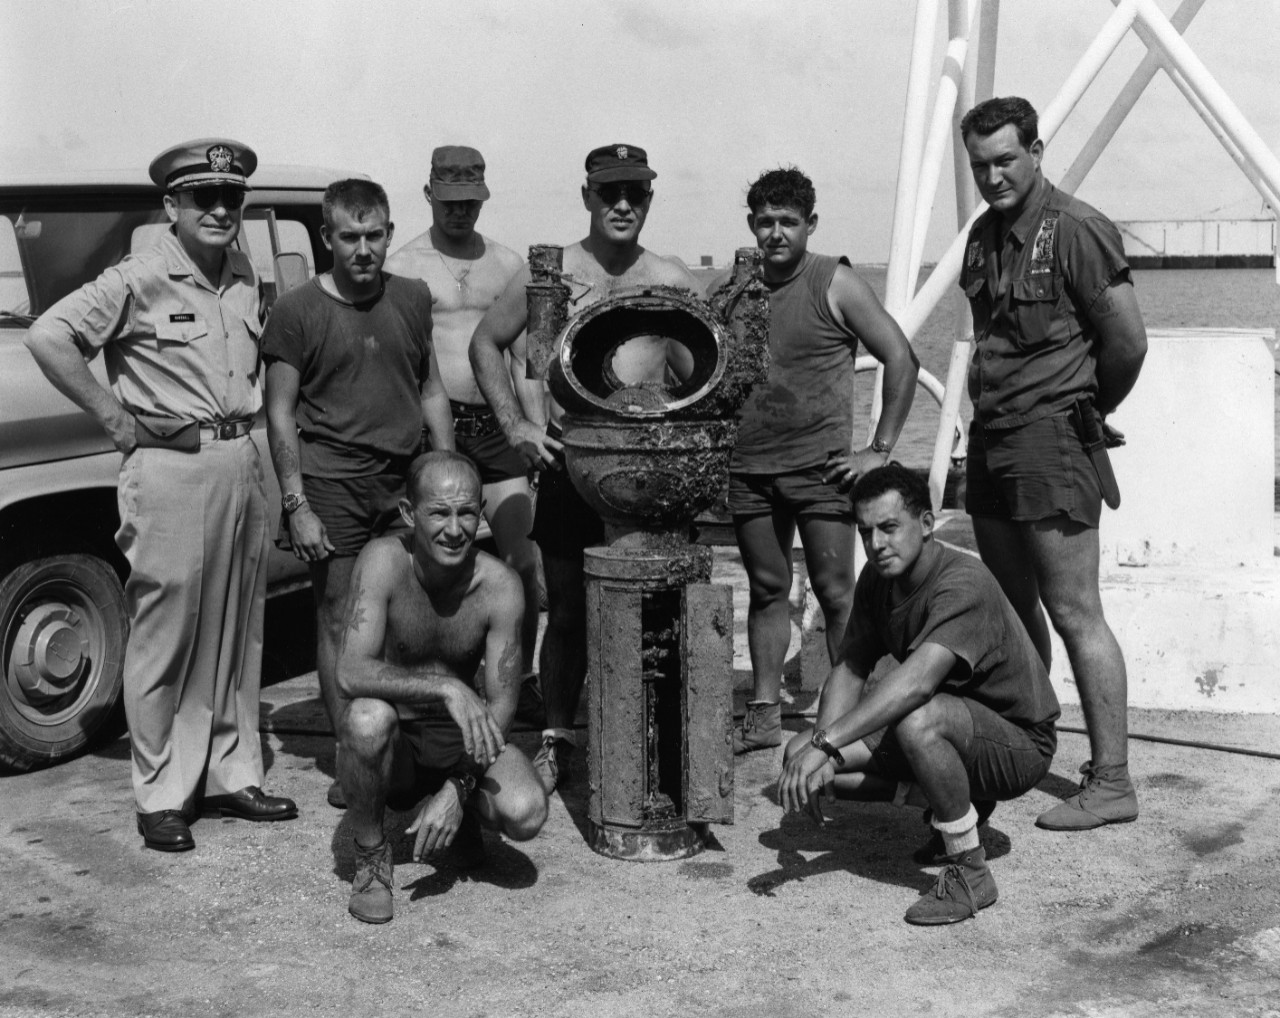 Recovery crew pose with binnacle from SMS Cormoran, salvaged out of Guam Harbor in 1965. Officer at left is Captain W.L. Marshall, Commanding Officer of the Ship Repair Facility. Shirtless individual directly behind binnacle may be the donor, Lieutenant Commander John Naquin.